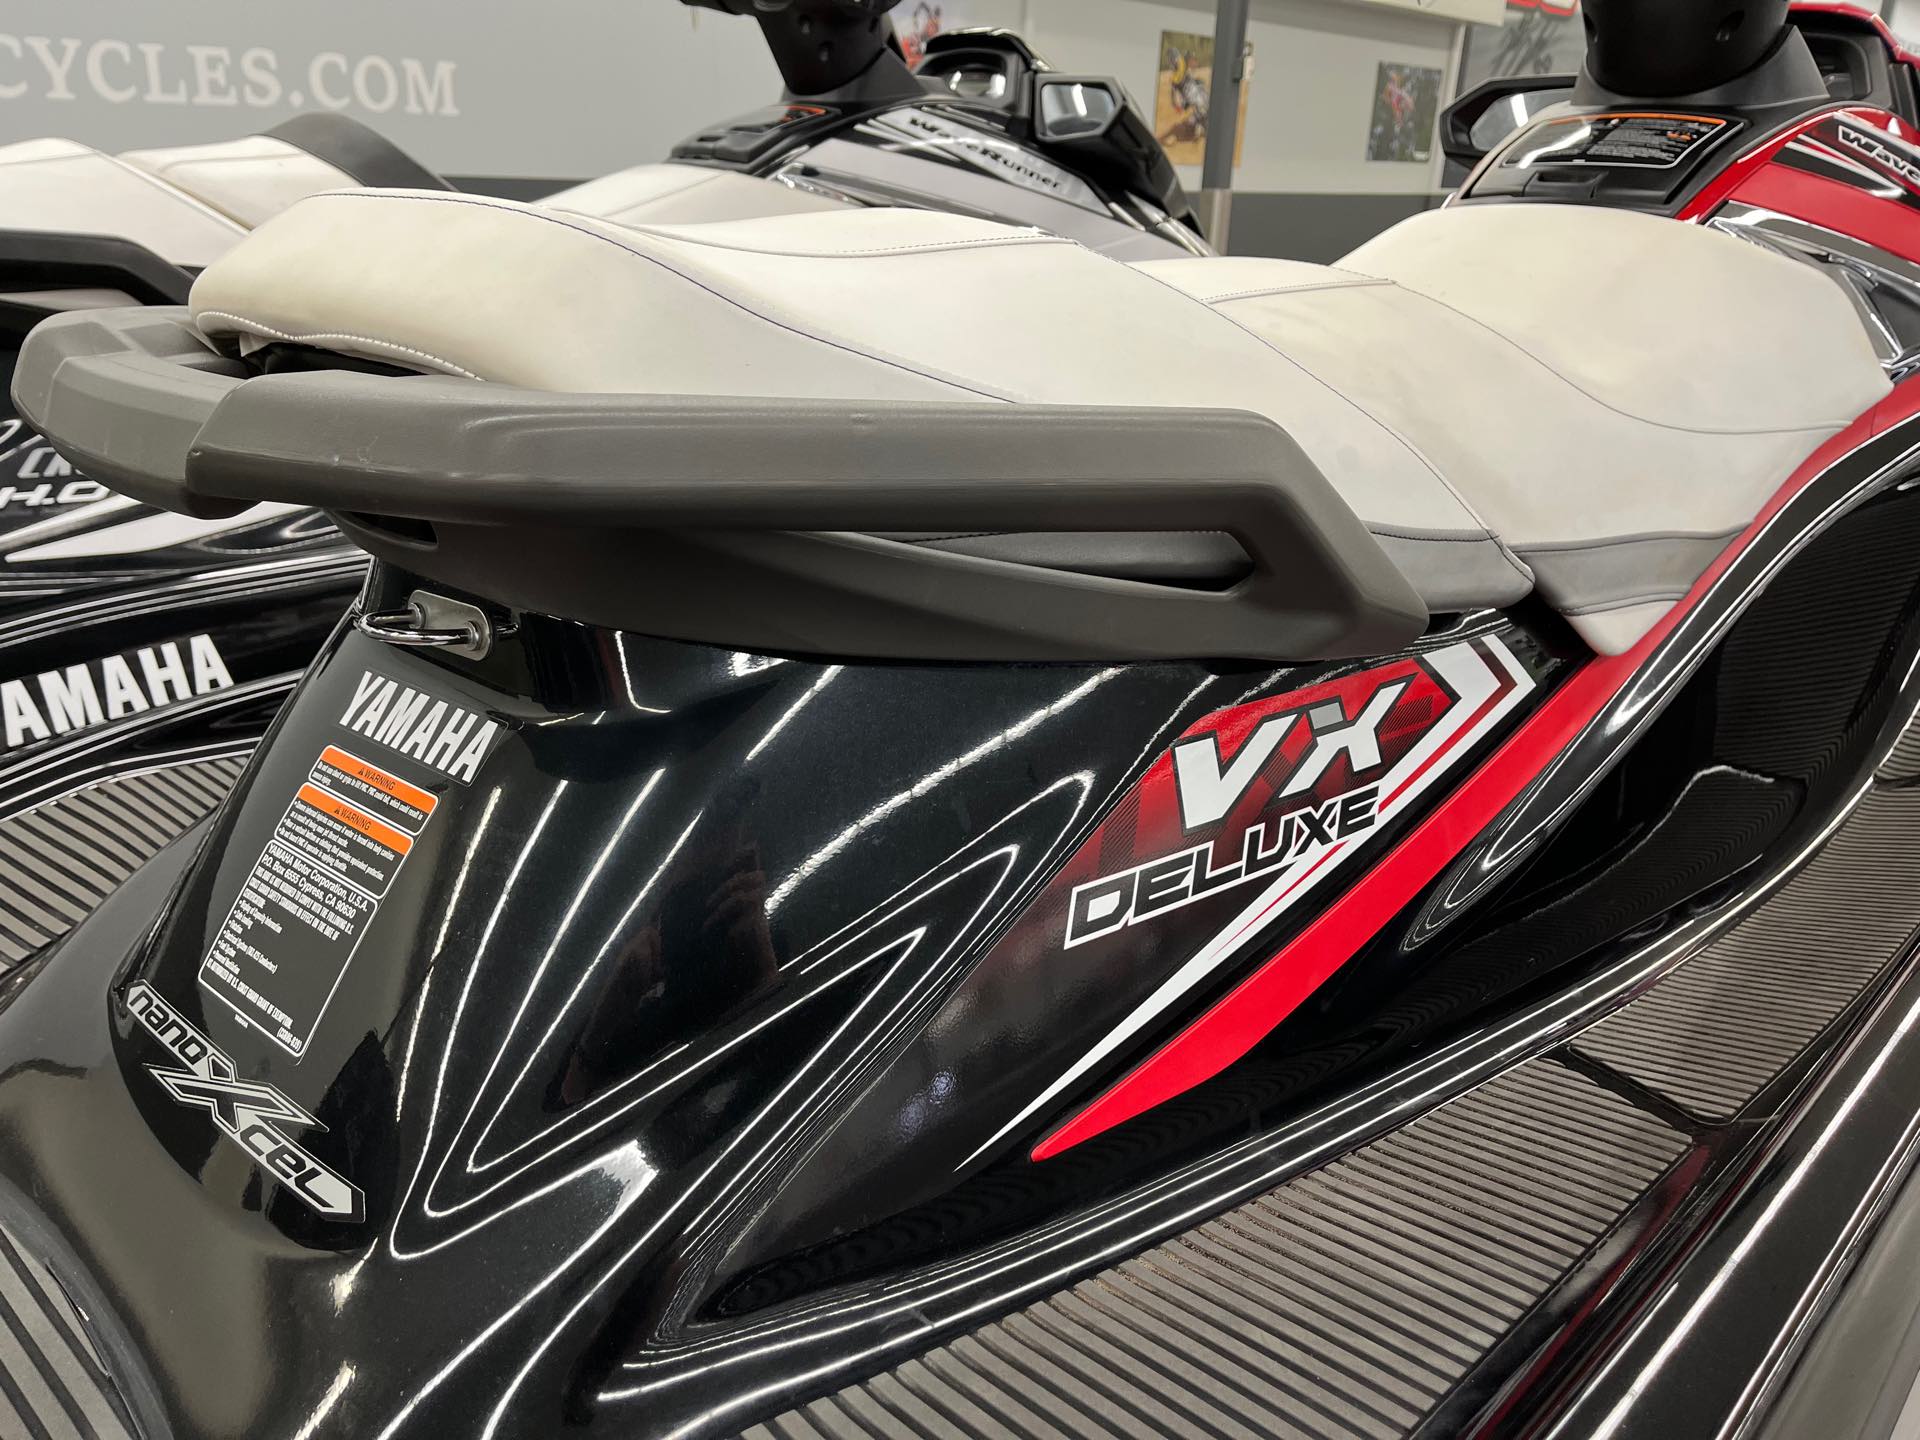 2016 YAMAHA VX DELUXE at Aces Motorcycles - Denver